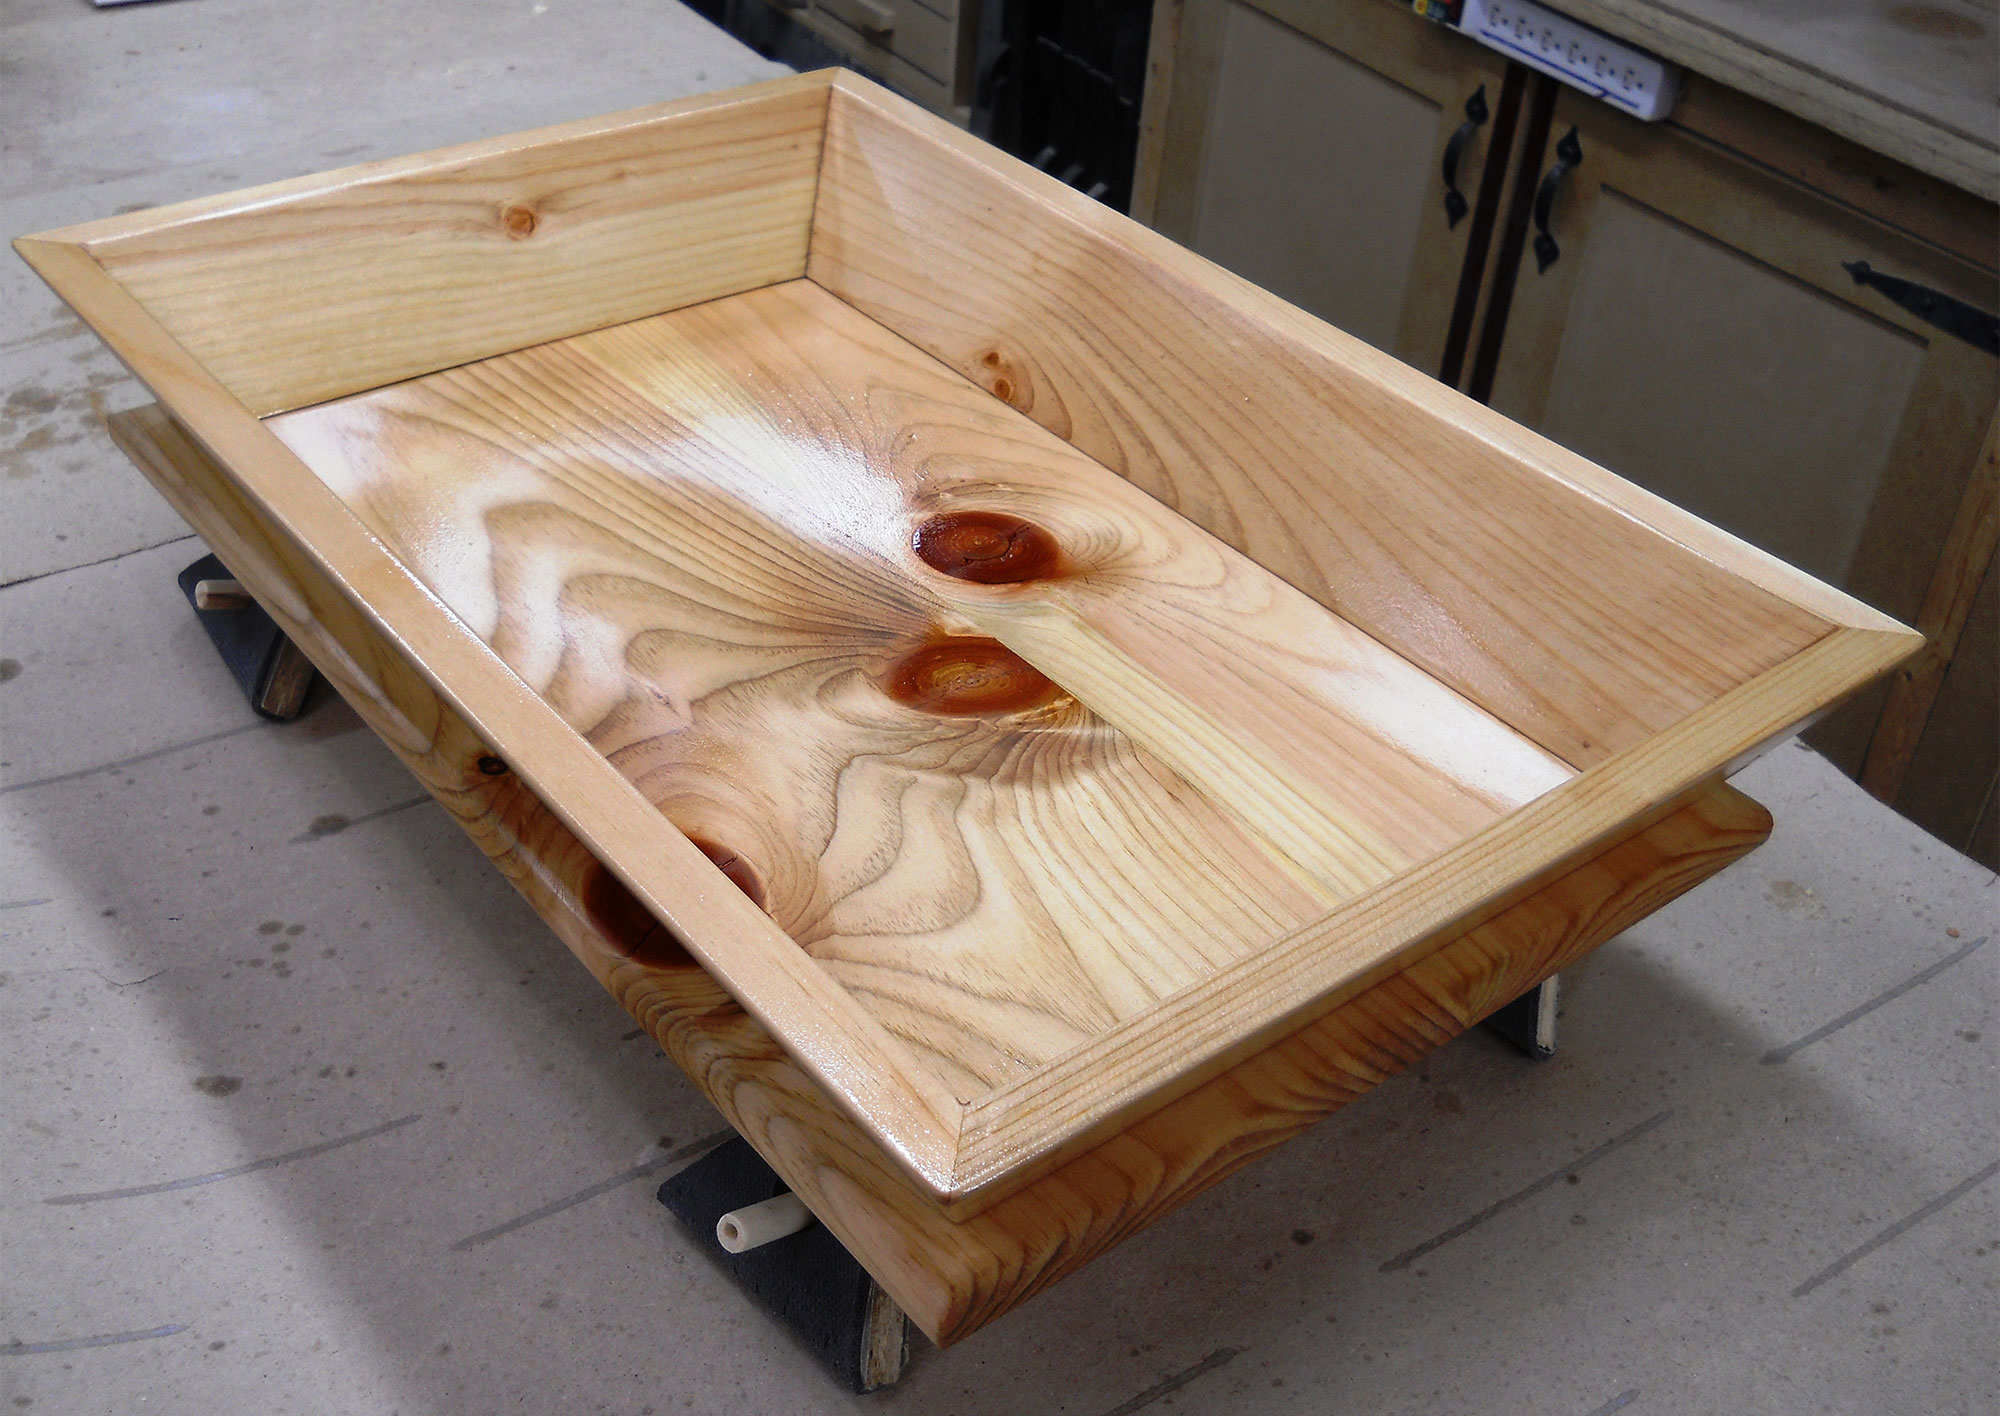 Make This Tray to Master the Dovetail Key